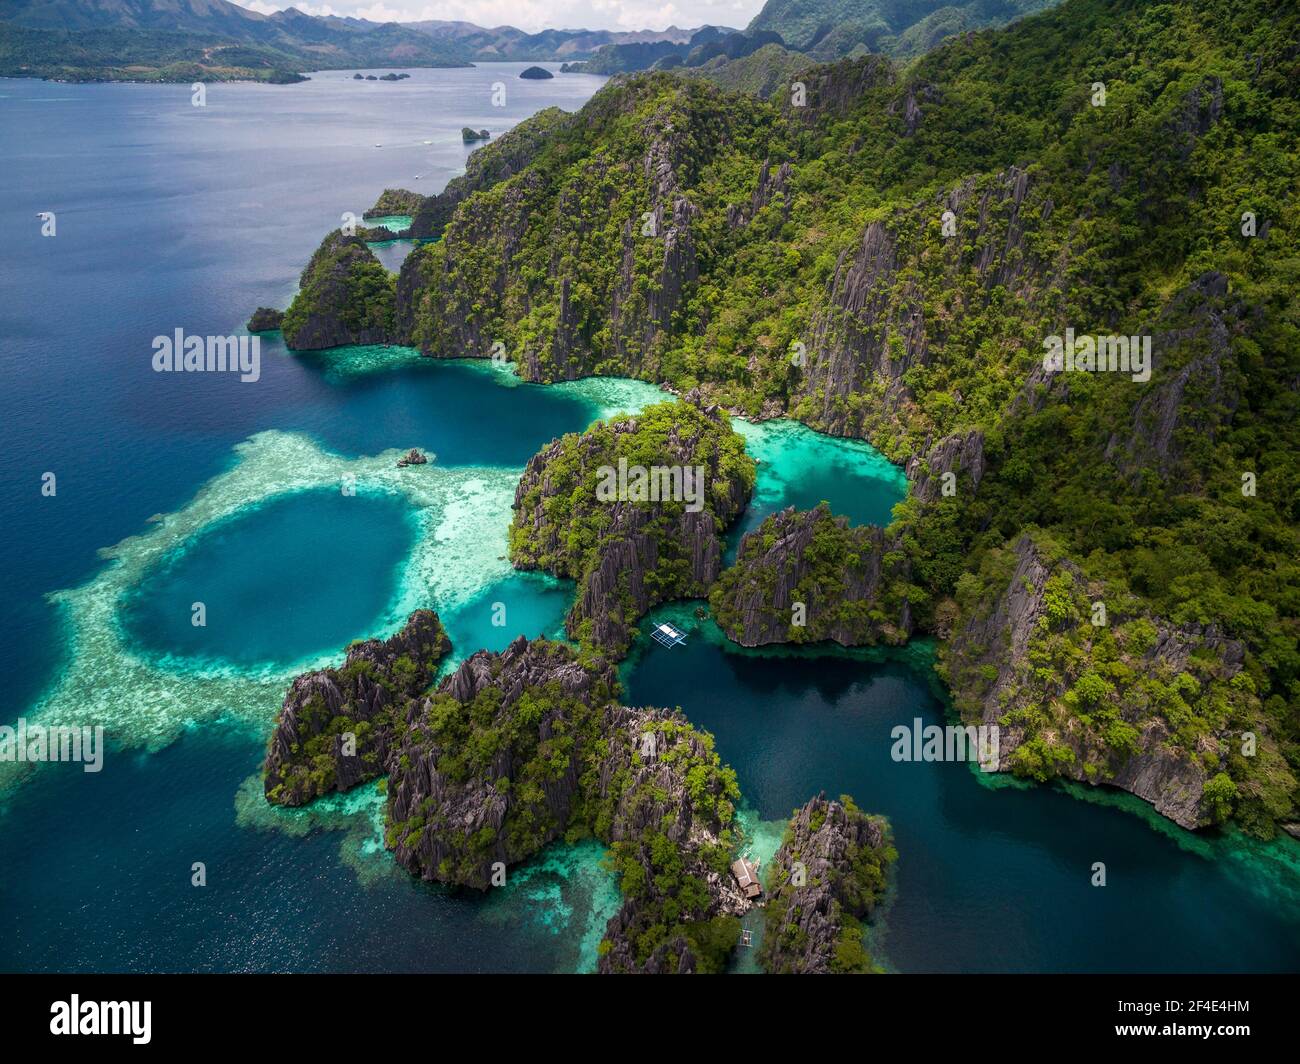 Aerial view of karst scenery at Twin Lagoon in Coron Island, Palawan, Philippines. Stock Photo